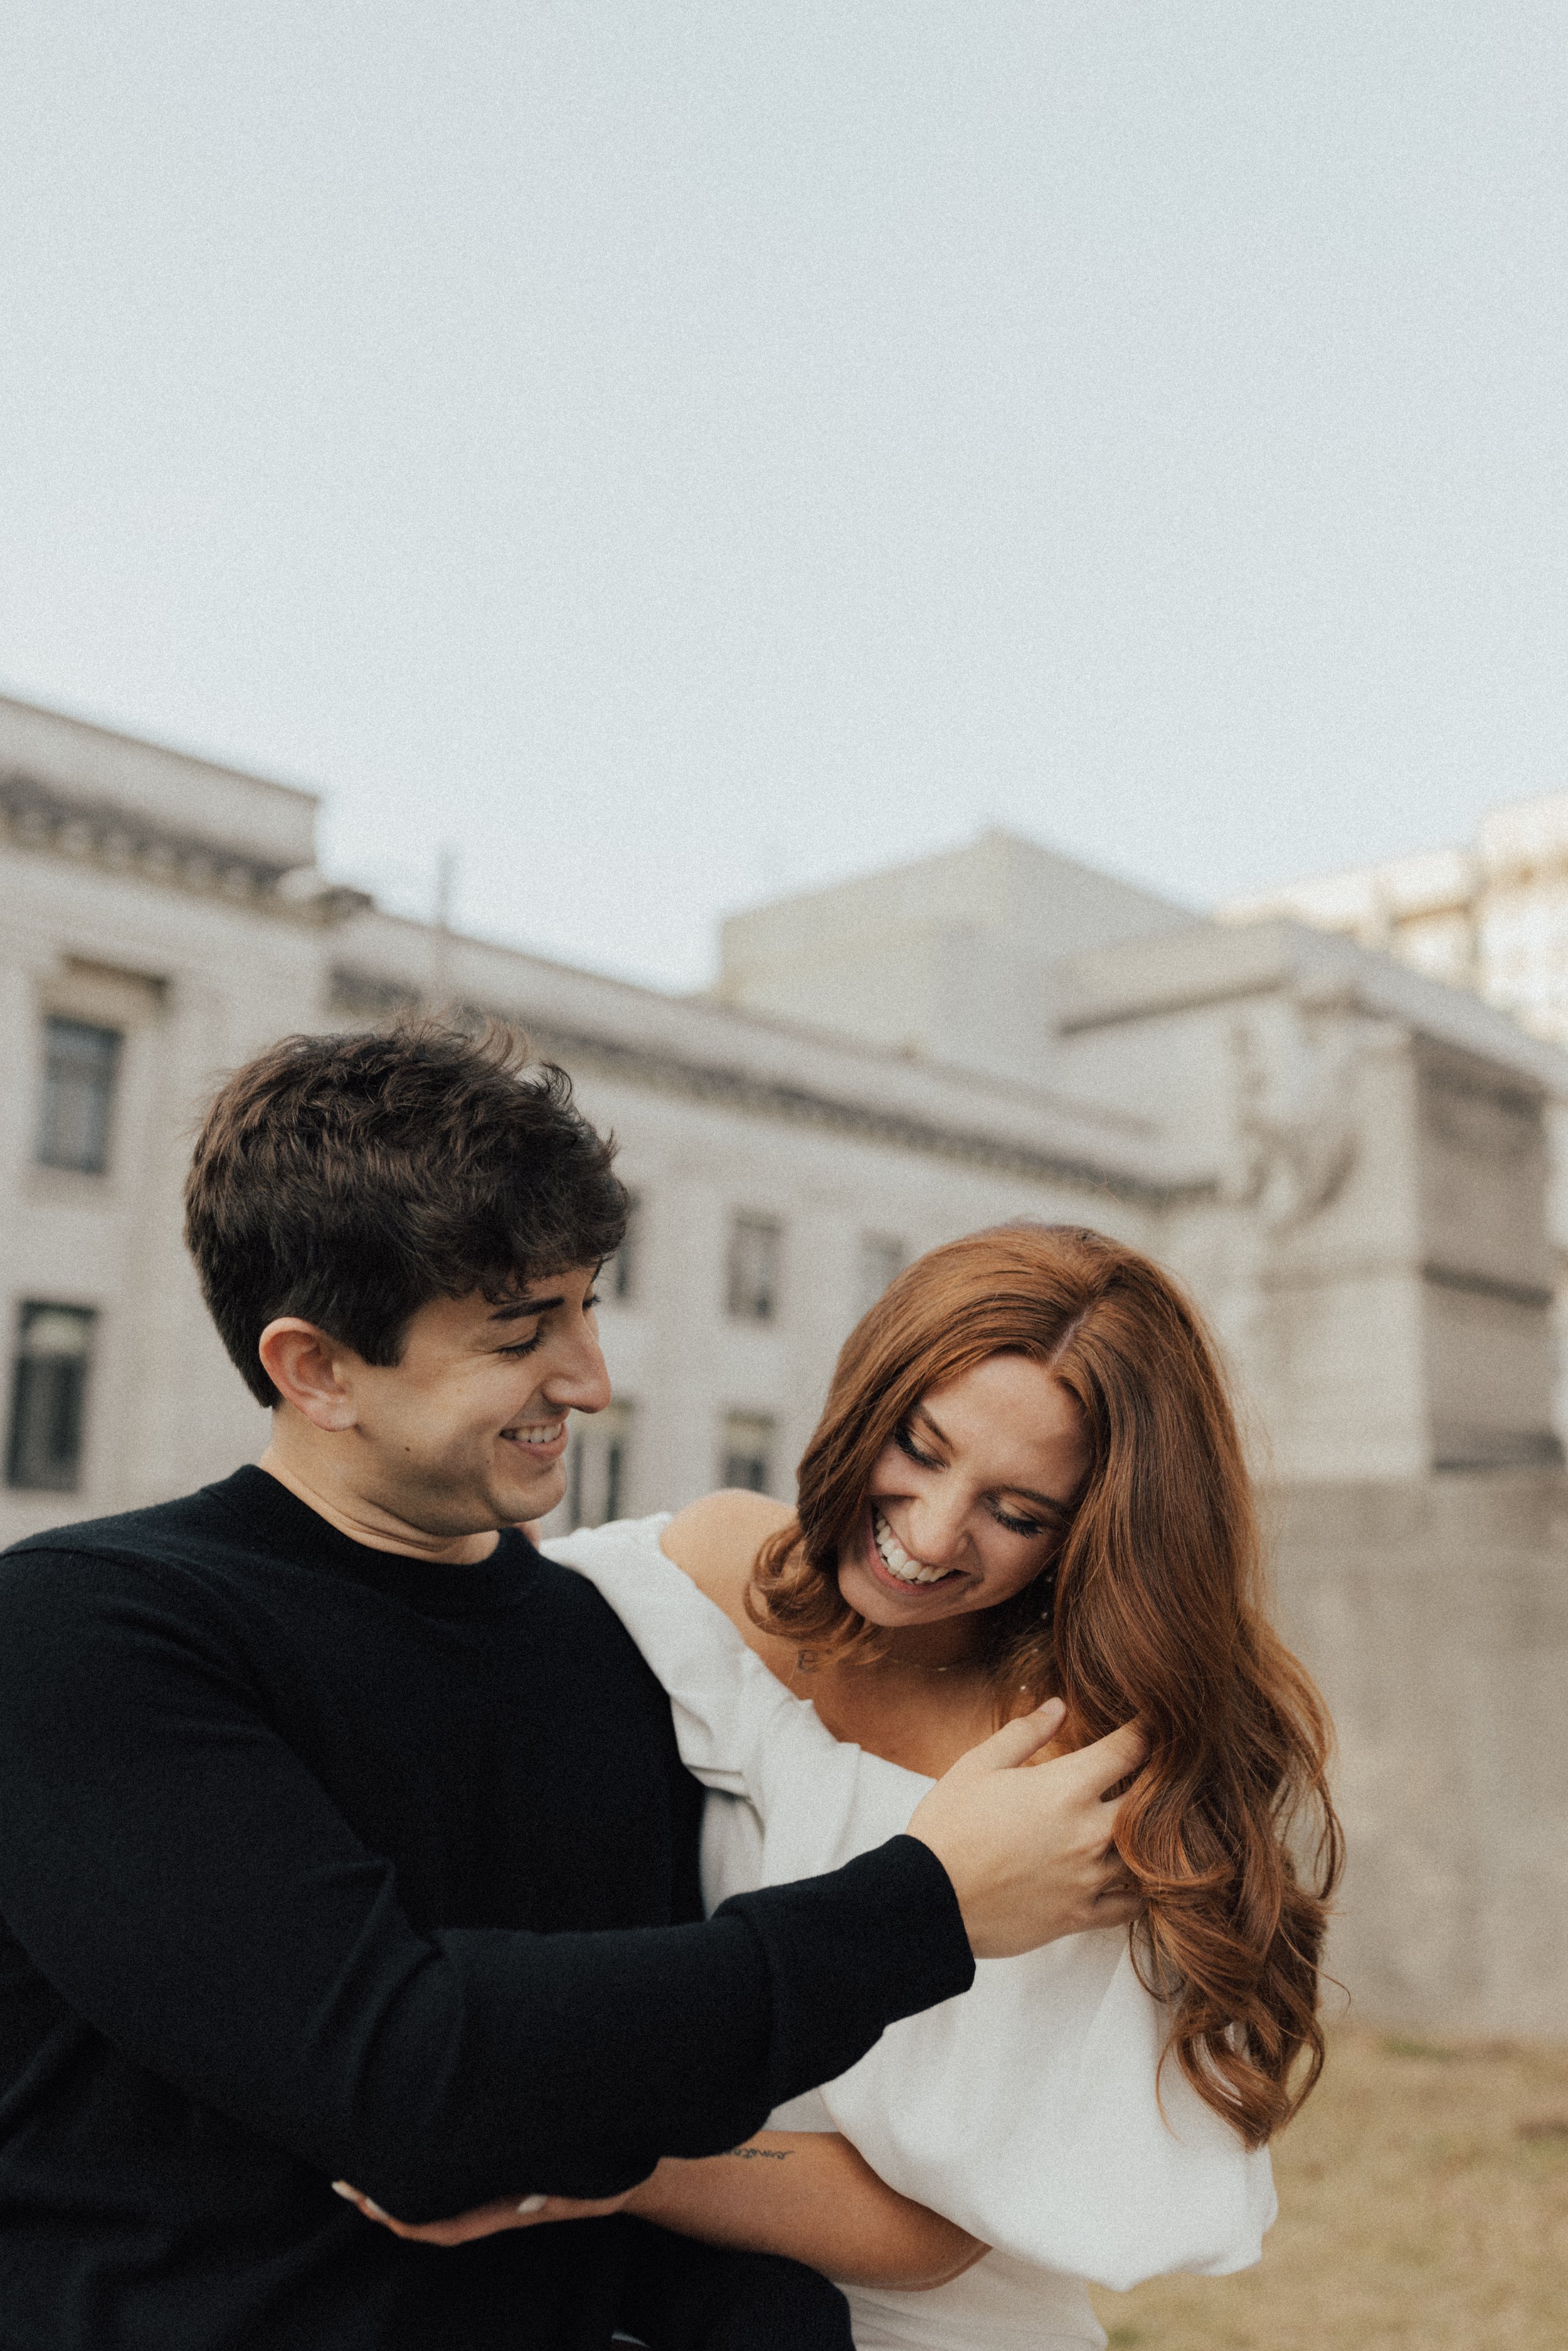 jill-and-jeffrey-winter-engagement-session-hotel-napoleon-courthouse-downtown-memphis-arkansas-tennessee-wedding-photographer-jo-darling-photography-46.jpg